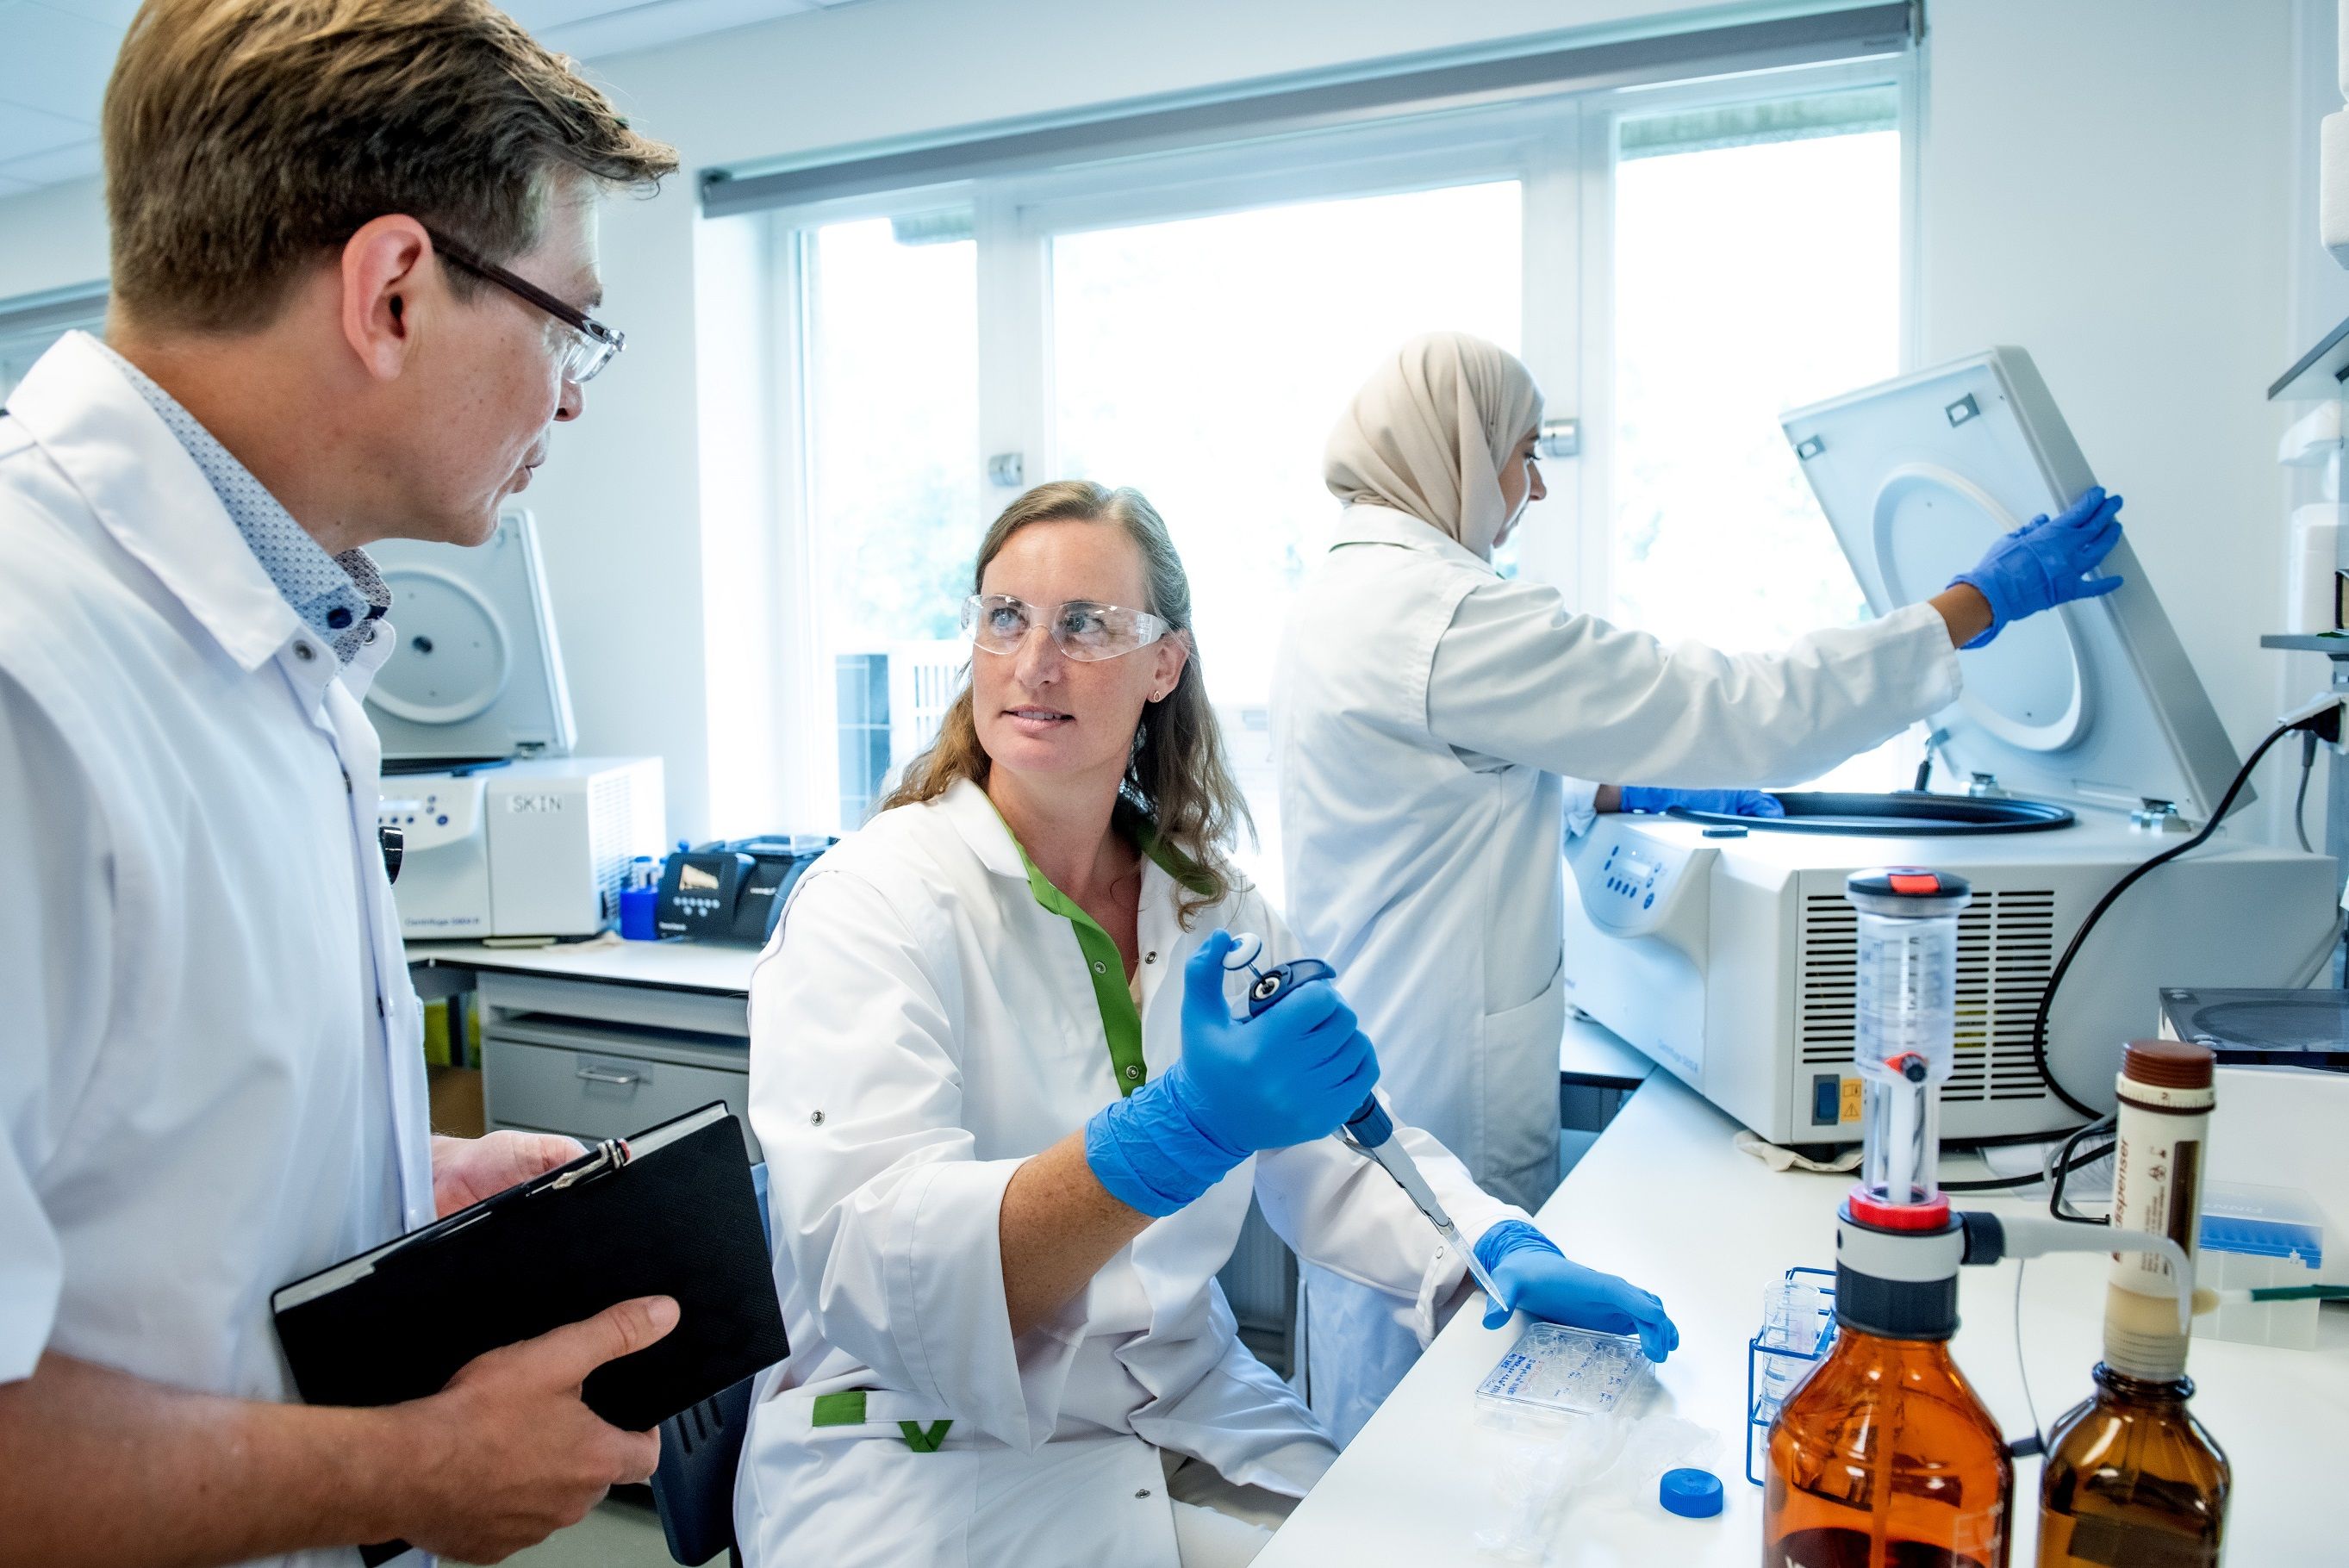 VUB and UZ Brussel SKIN research group identifies autoreactive IgE antibodies as biomarker for patients that live with atopic dermatitis in combination with additional allergic diseases 